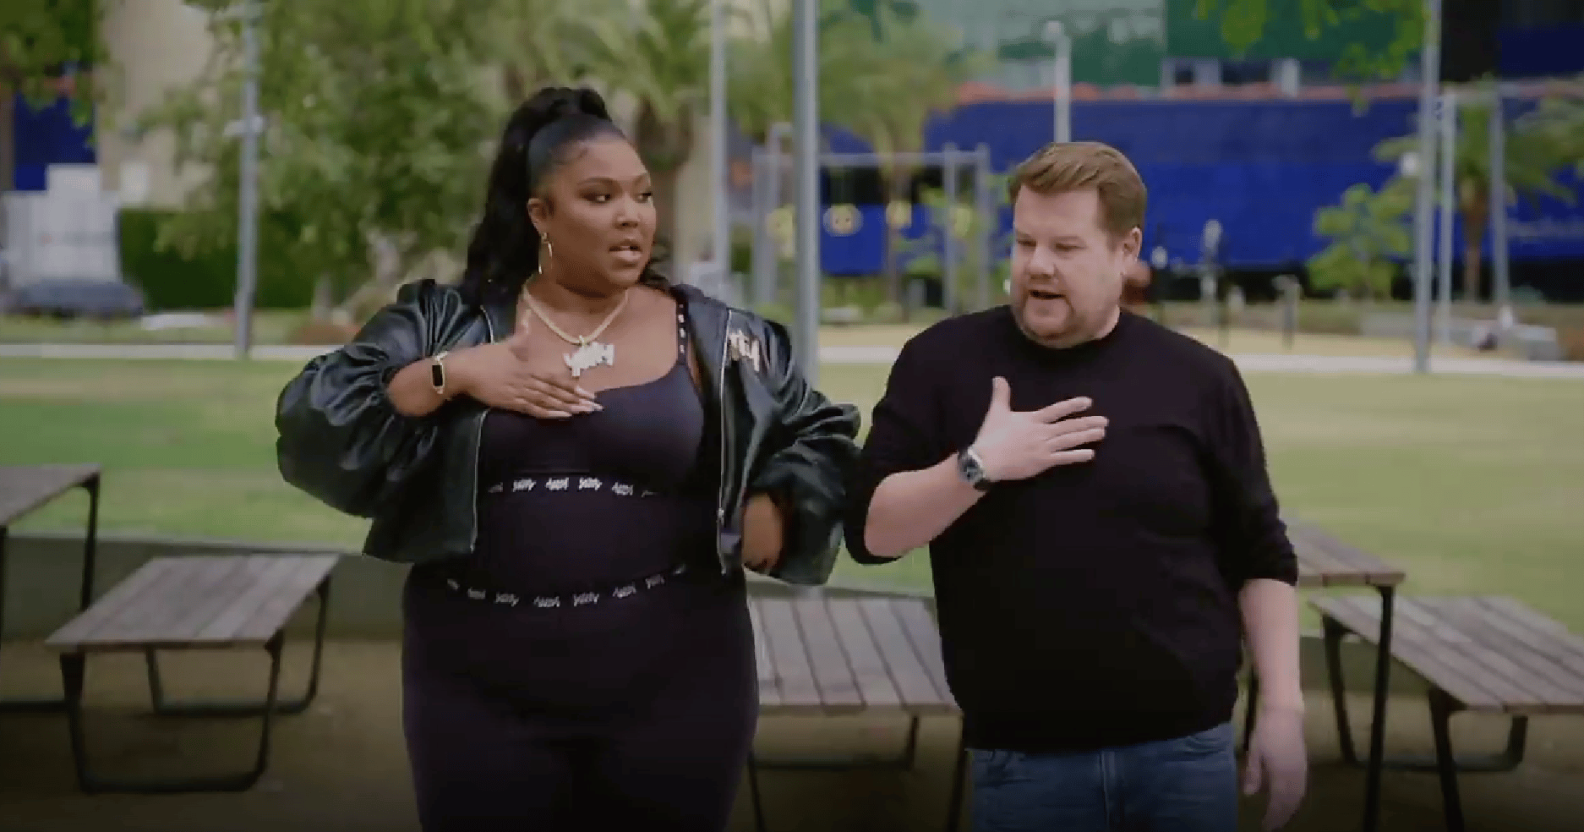 Lizzo repped her inclusive shapewear brand Yitty during her Carpool Karaoke appearance.